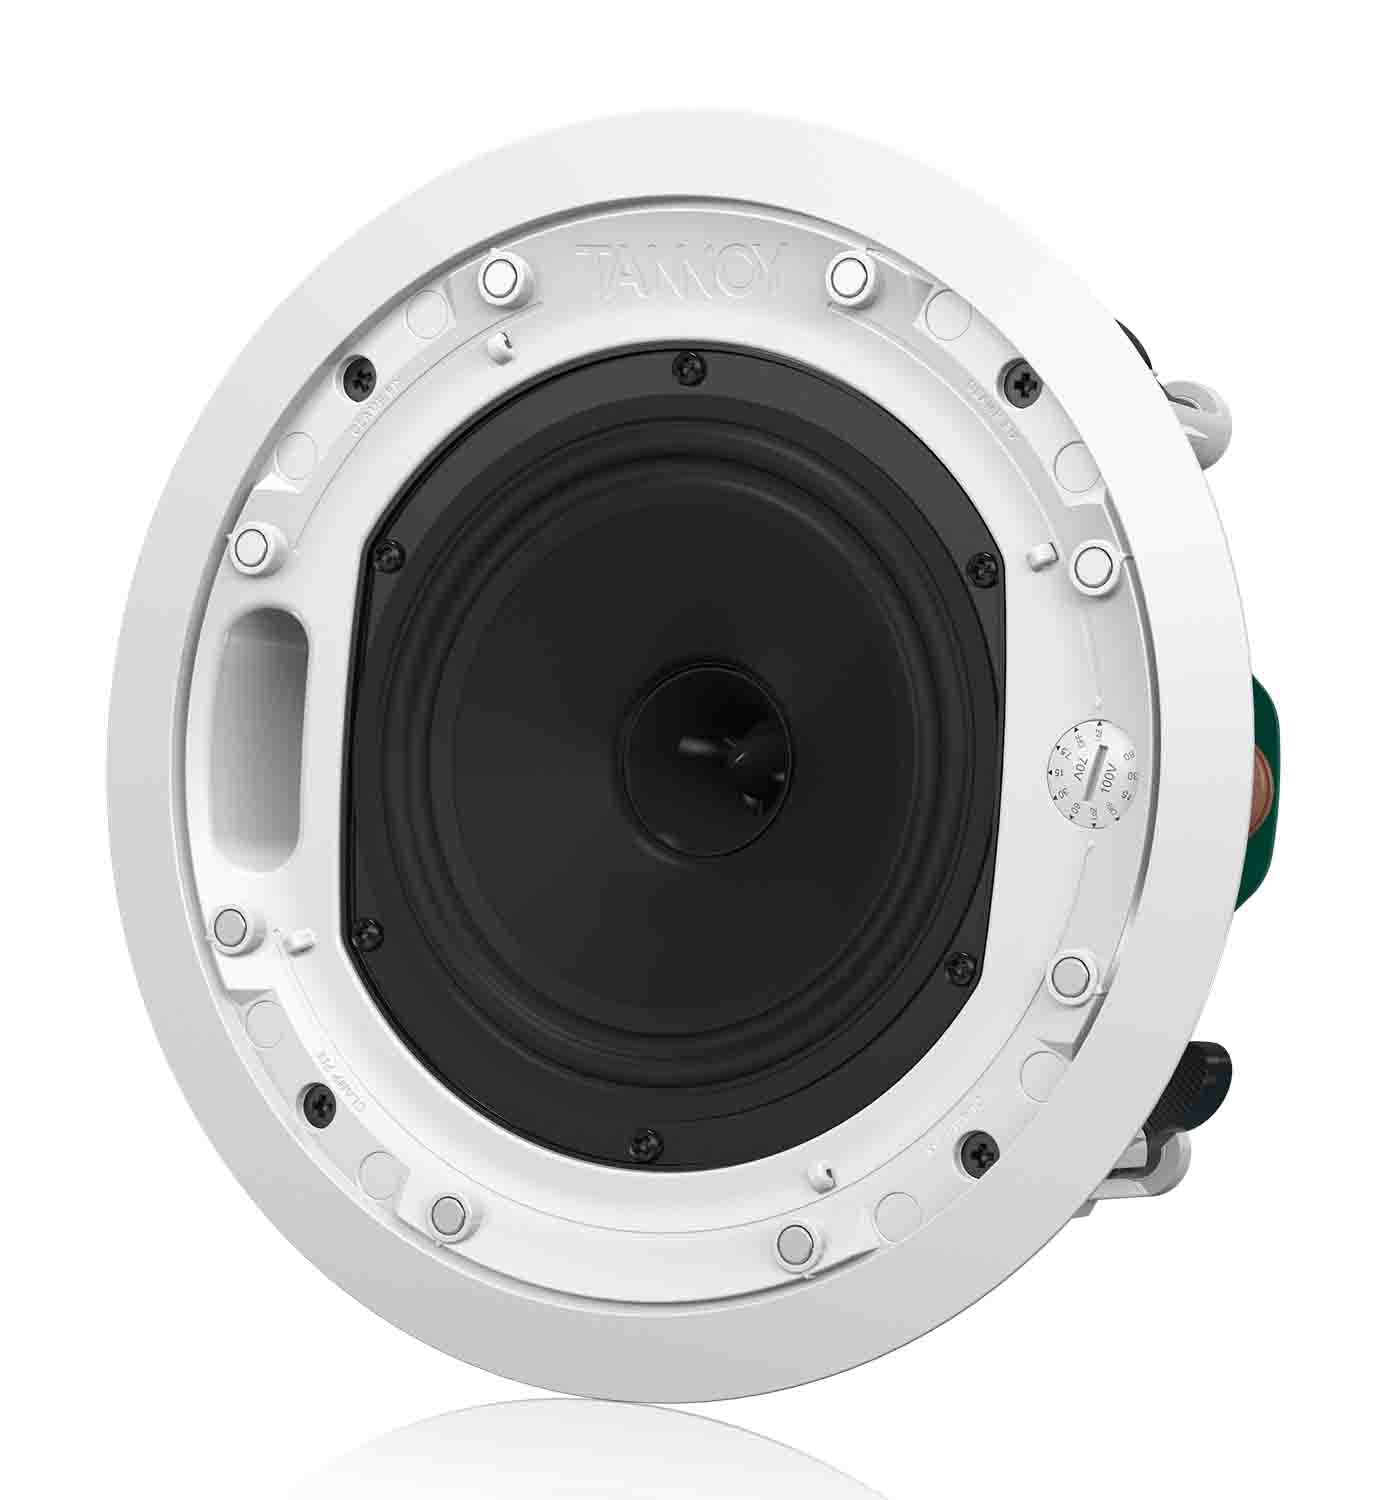 Tannoy CMS 603DC PI, 6-Inch Full Range Ceiling Loudspeaker with Dual Concentric Driver - Pre-Install - Hollywood DJ